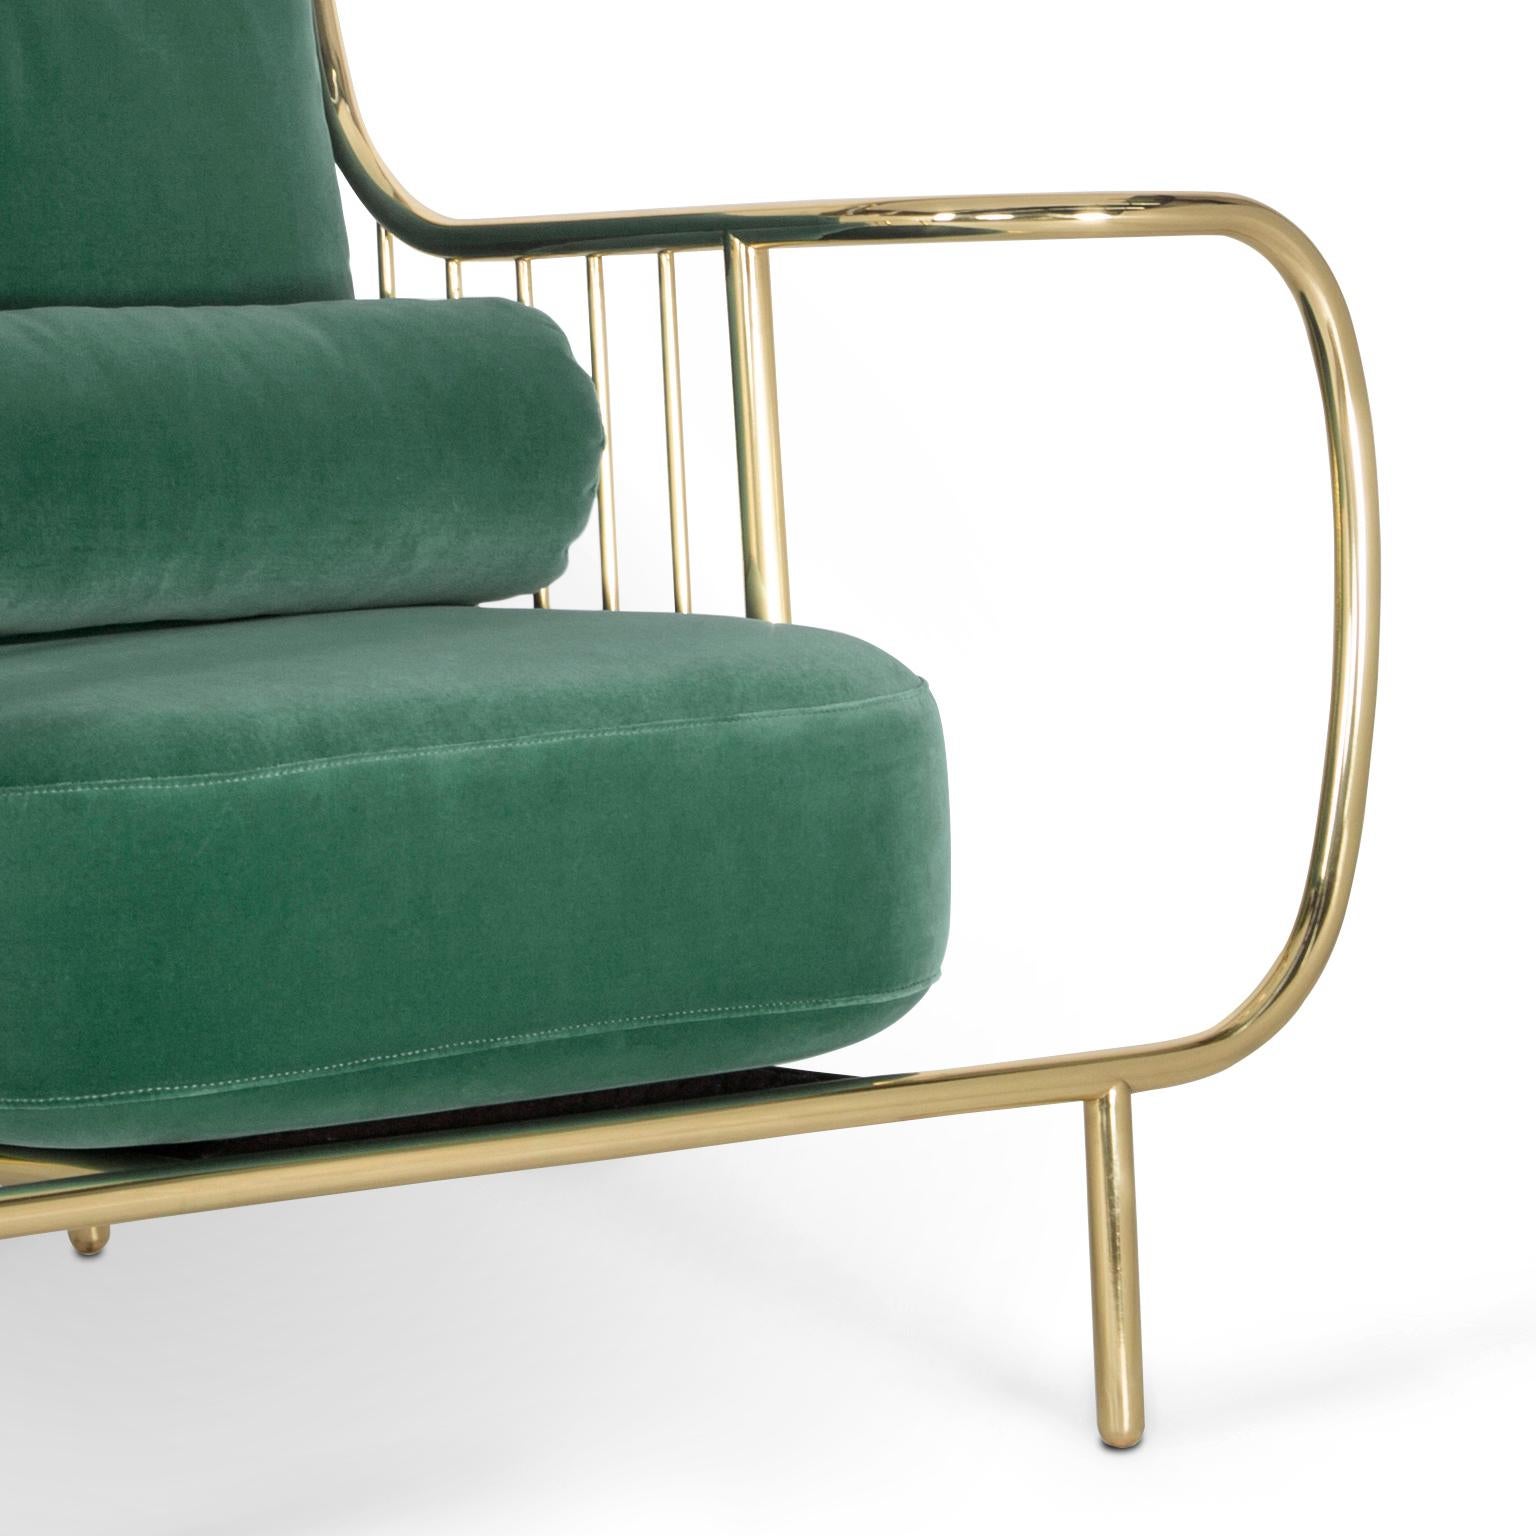 Contemporary Modern Liberty Armchair High Back in Polished Brass and Green Velvet Cushions For Sale